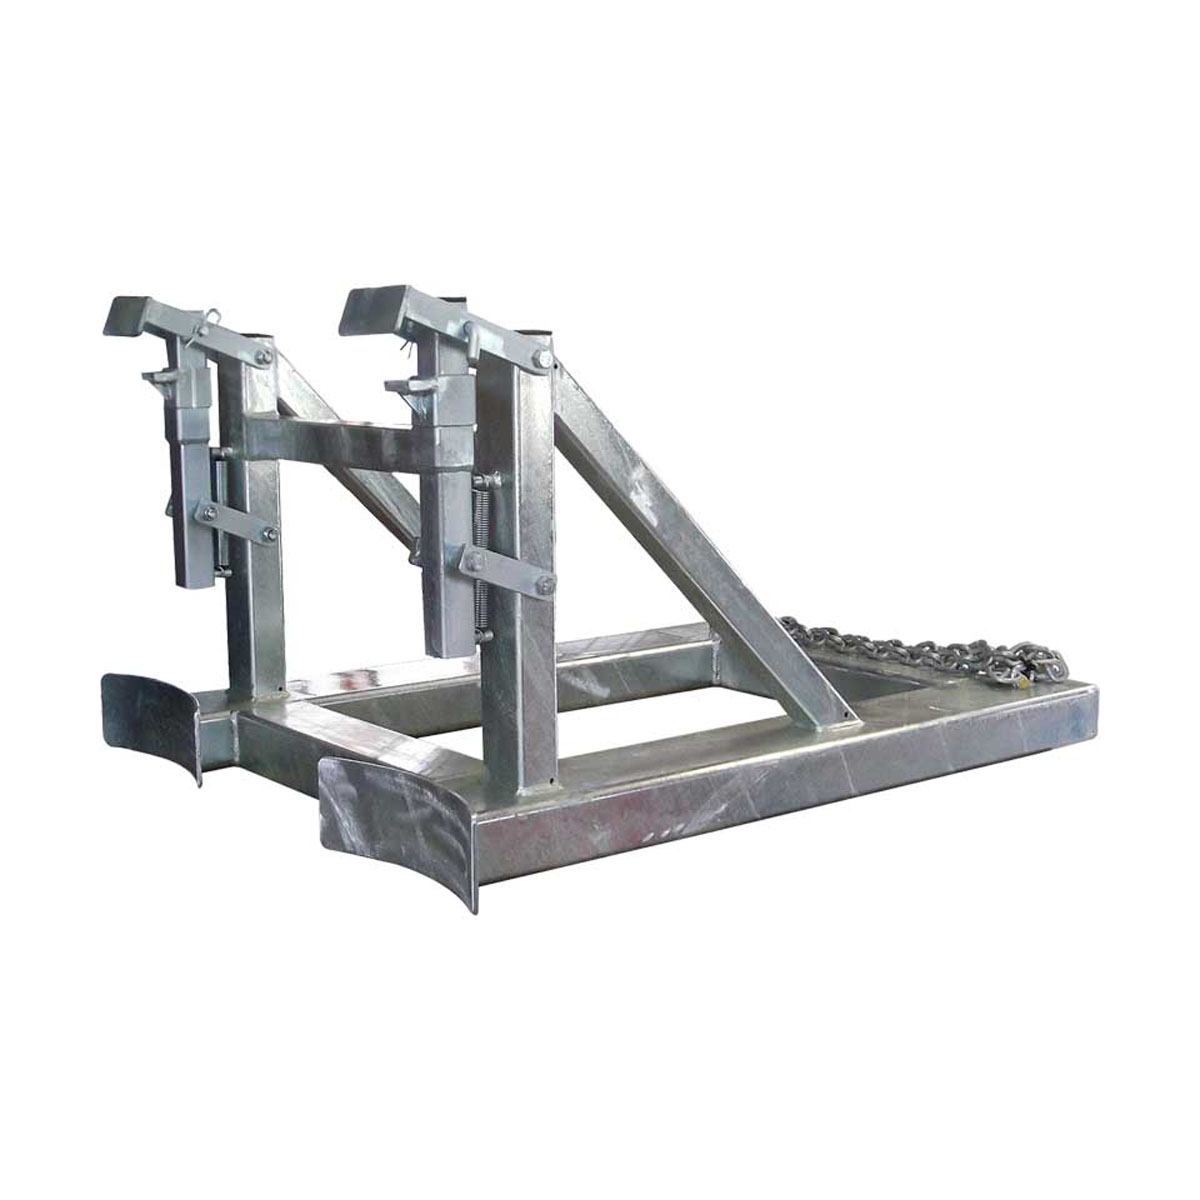 Buy Drum Lifter - Beak-Grip Forklift Attachment (Double) available at Astrolift NZ